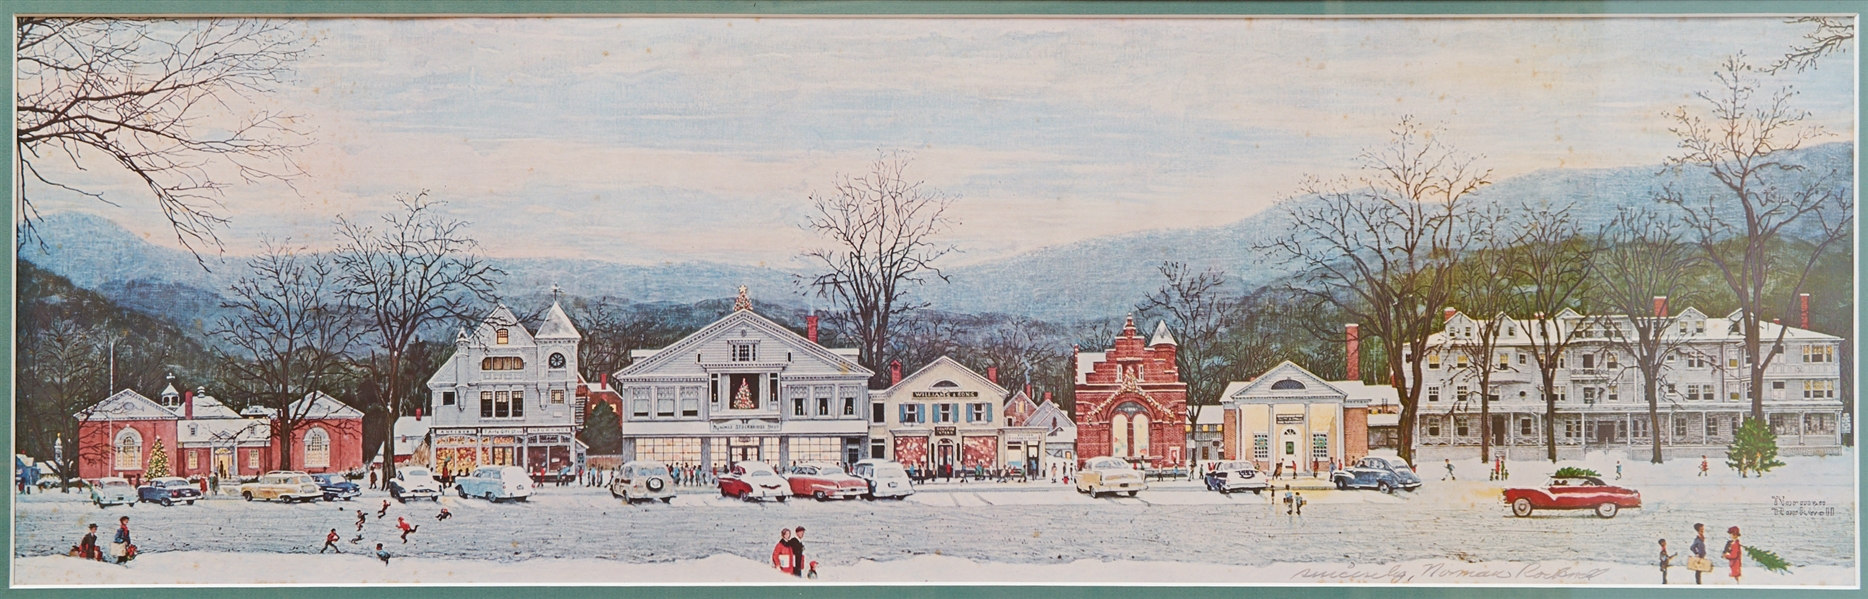 Norman Rockwell Signed Print of His Beloved Piece ''Stockbridge Main Street at Christmas''